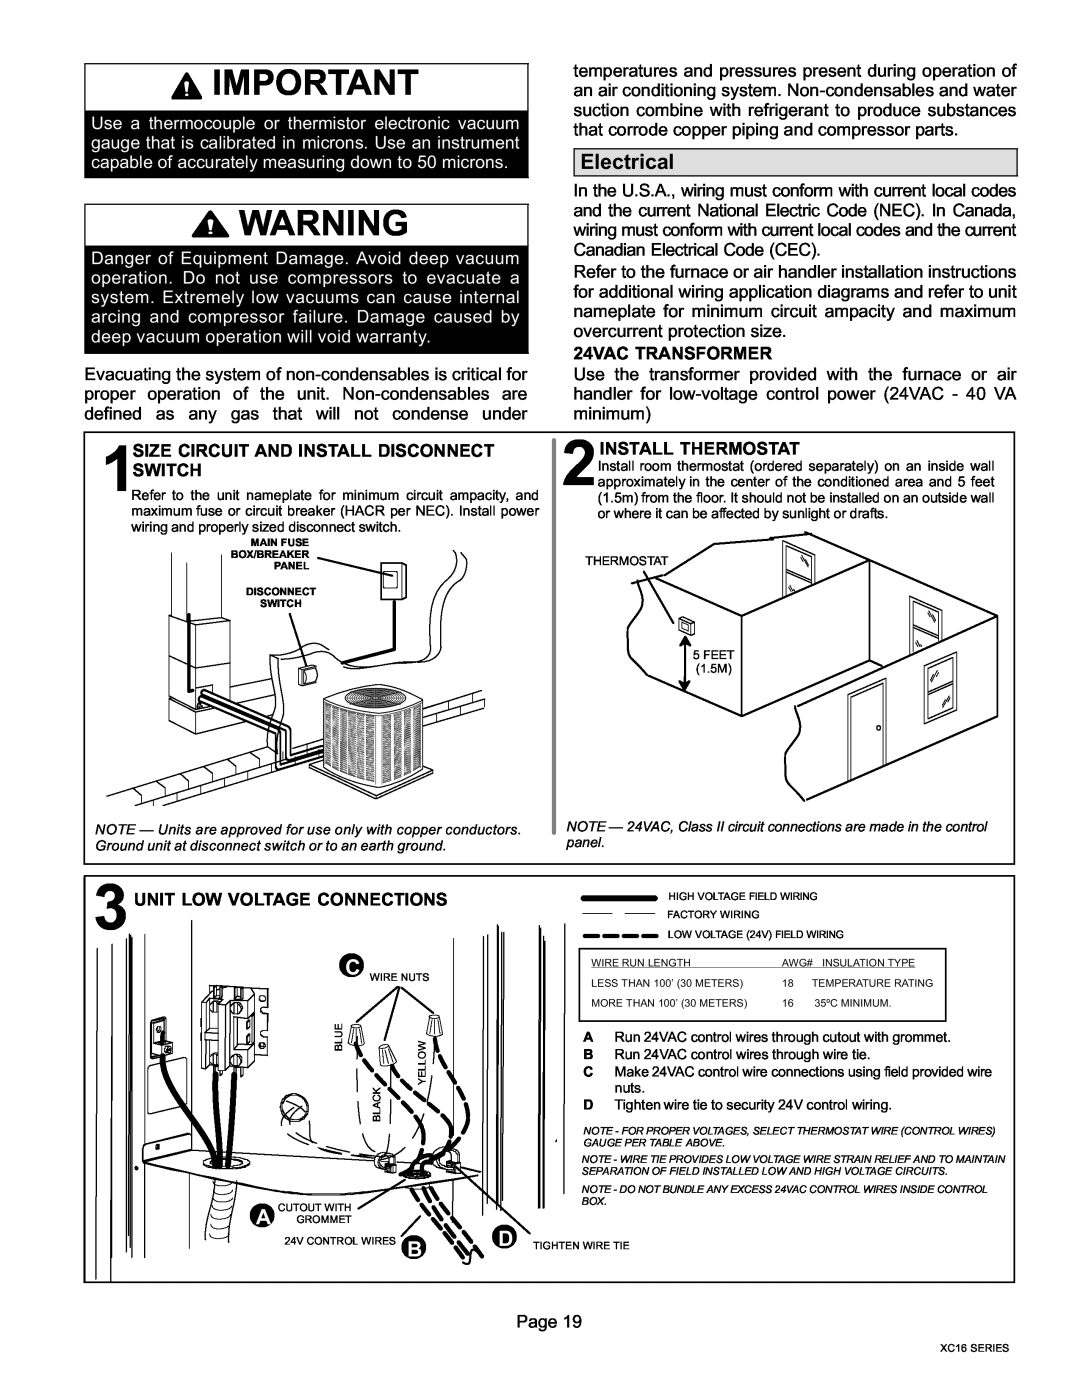 Lenox Elite Series X16 Air Conditioner Units, 506637-01 installation instructions Electrical 